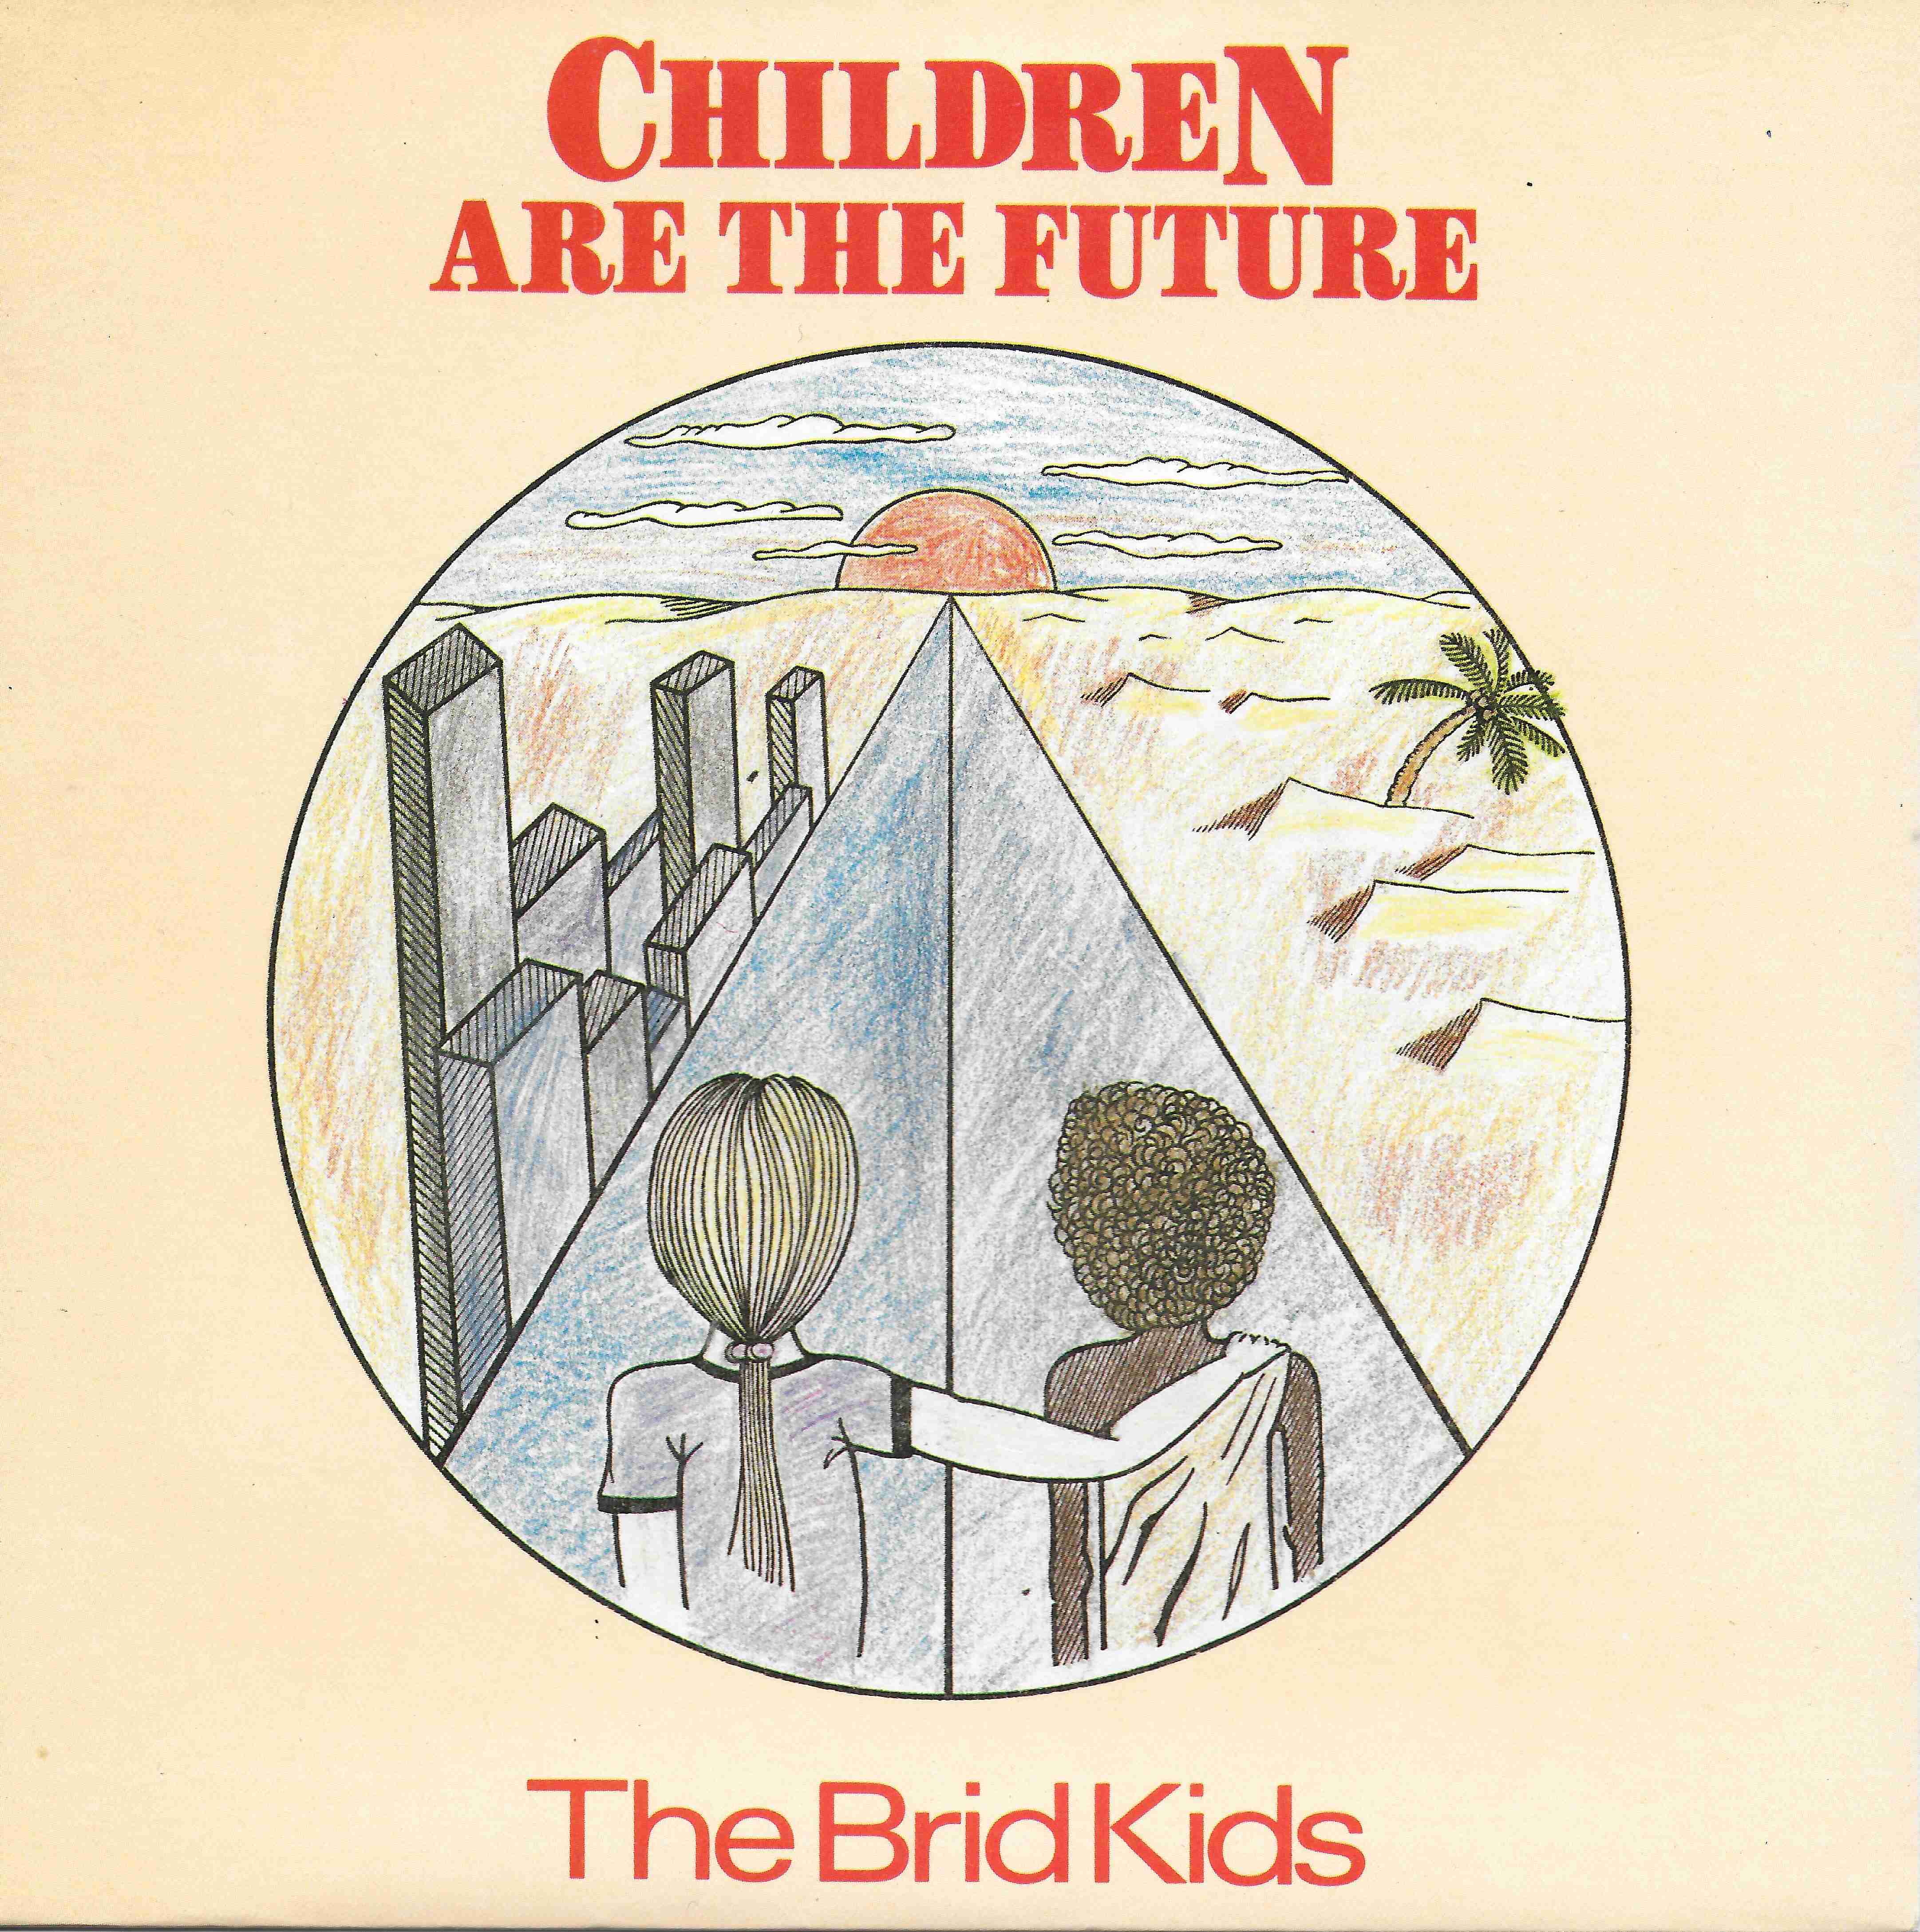 Picture of RESL 232 Children are the future by artist The Brid Kids from the BBC singles - Records and Tapes library